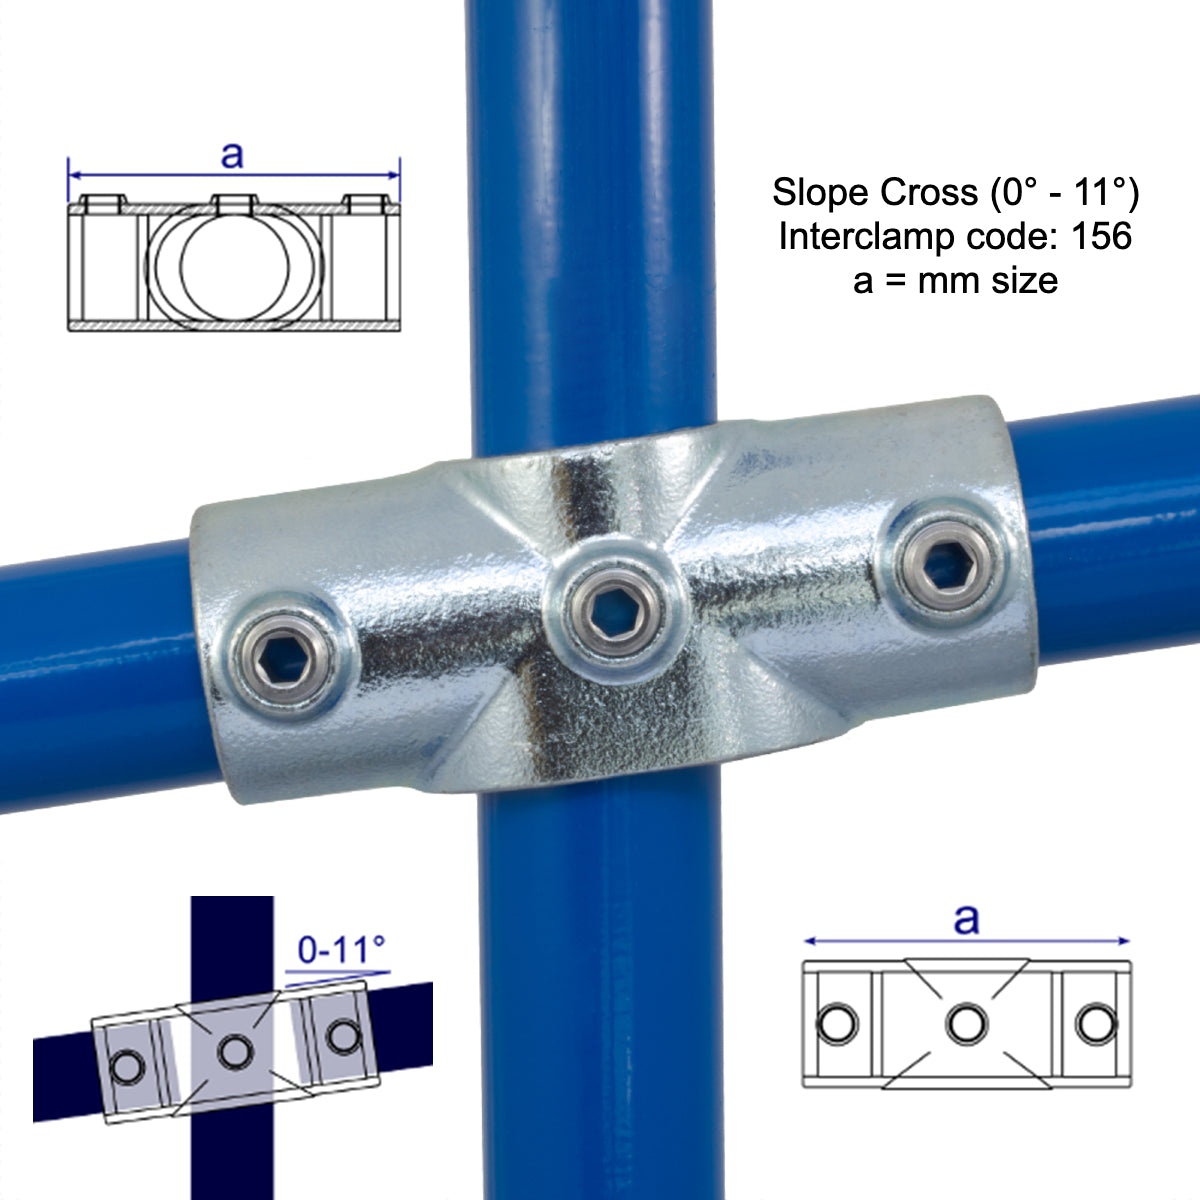 Slope Cross - 0 to 11 Degrees by Interclamp, Code 156. Shop rail and pipe fittings online chain.com.au. Australia wide shipping.